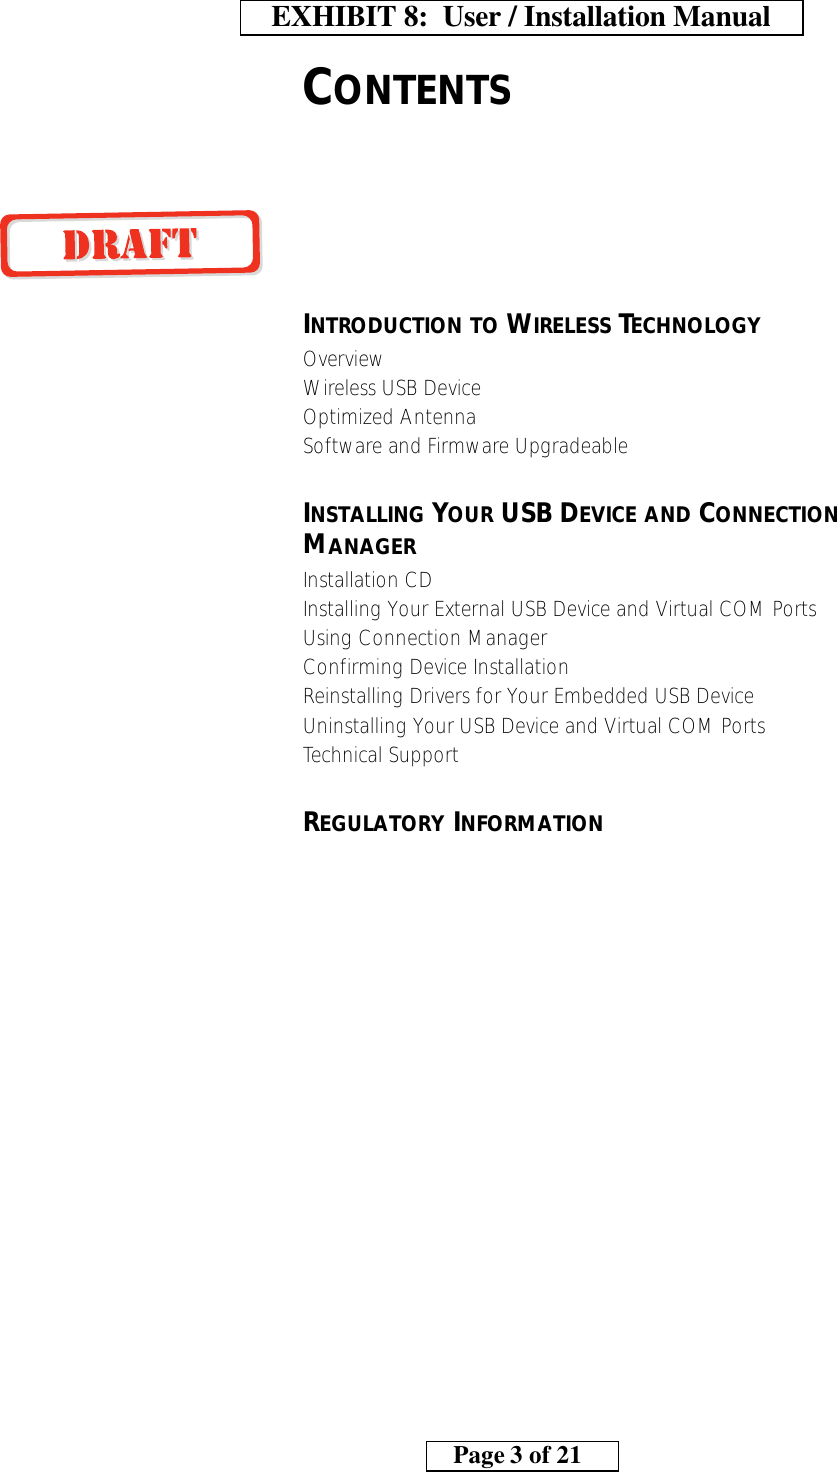 CONTENTSINTRODUCTION TO WIRELESS TECHNOLOGYOverviewWireless USB DeviceOptimized AntennaSoftware and Firmware UpgradeableINSTALLING YOUR USB DEVICE AND CONNECTION MANAGERInstallation CDInstalling Your External USB Device and Virtual COM PortsUsing Connection ManagerConfirming Device InstallationReinstalling Drivers for Your Embedded USB DeviceUninstalling Your USB Device and Virtual COM PortsTechnical SupportREGULATORY INFORMATION    EXHIBIT 8:  User / Installation Manual        Page 3 of 21    